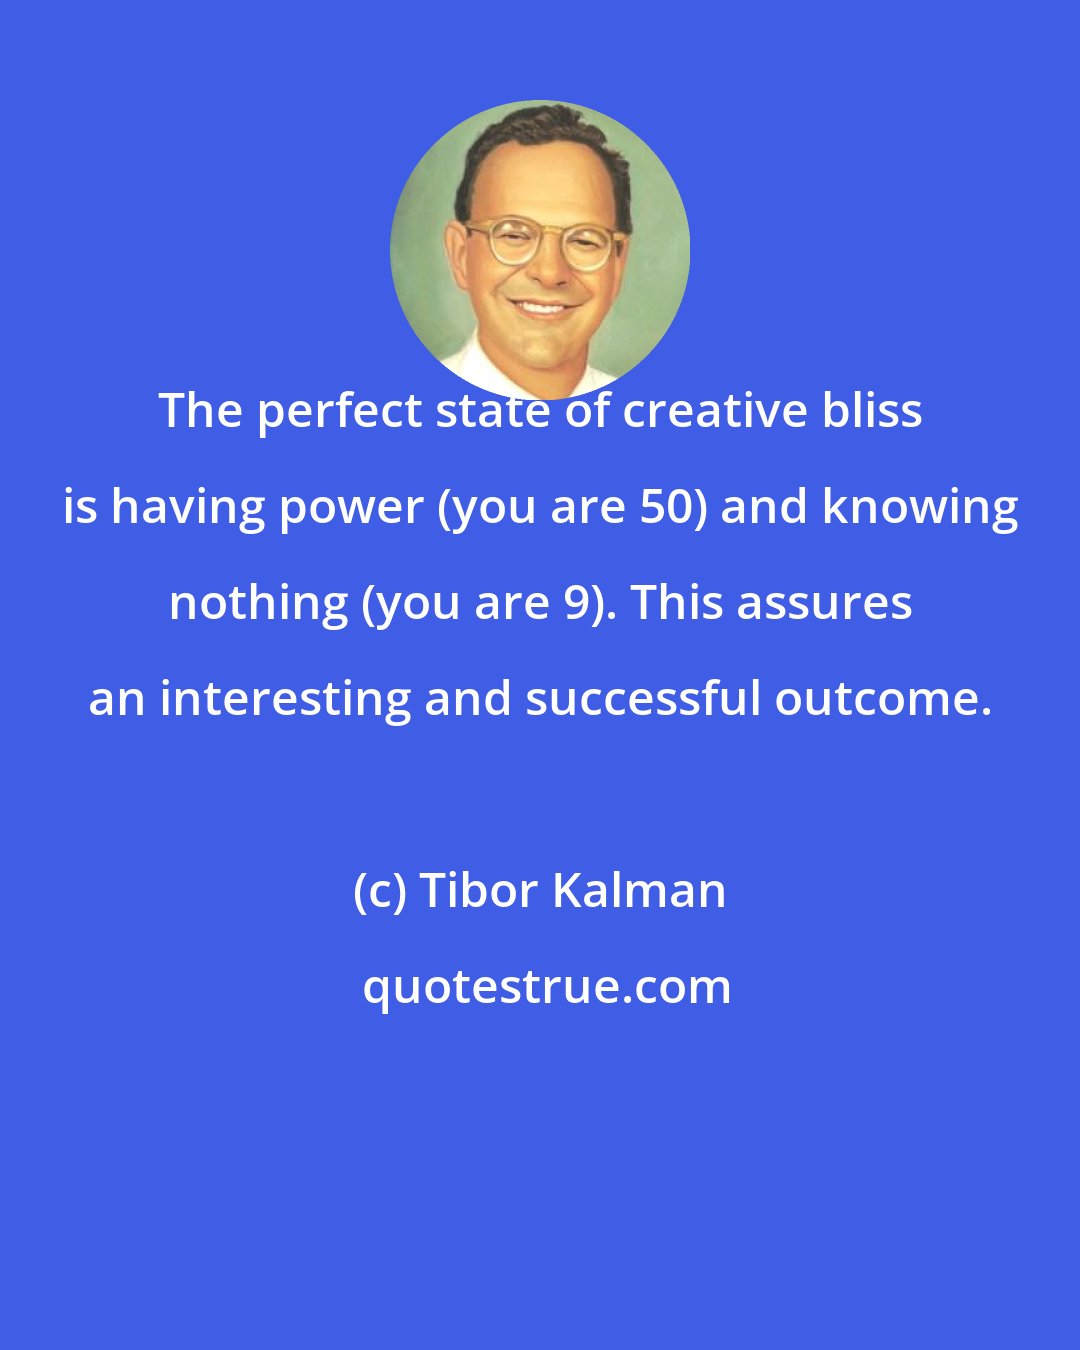 Tibor Kalman: The perfect state of creative bliss is having power (you are 50) and knowing nothing (you are 9). This assures an interesting and successful outcome.